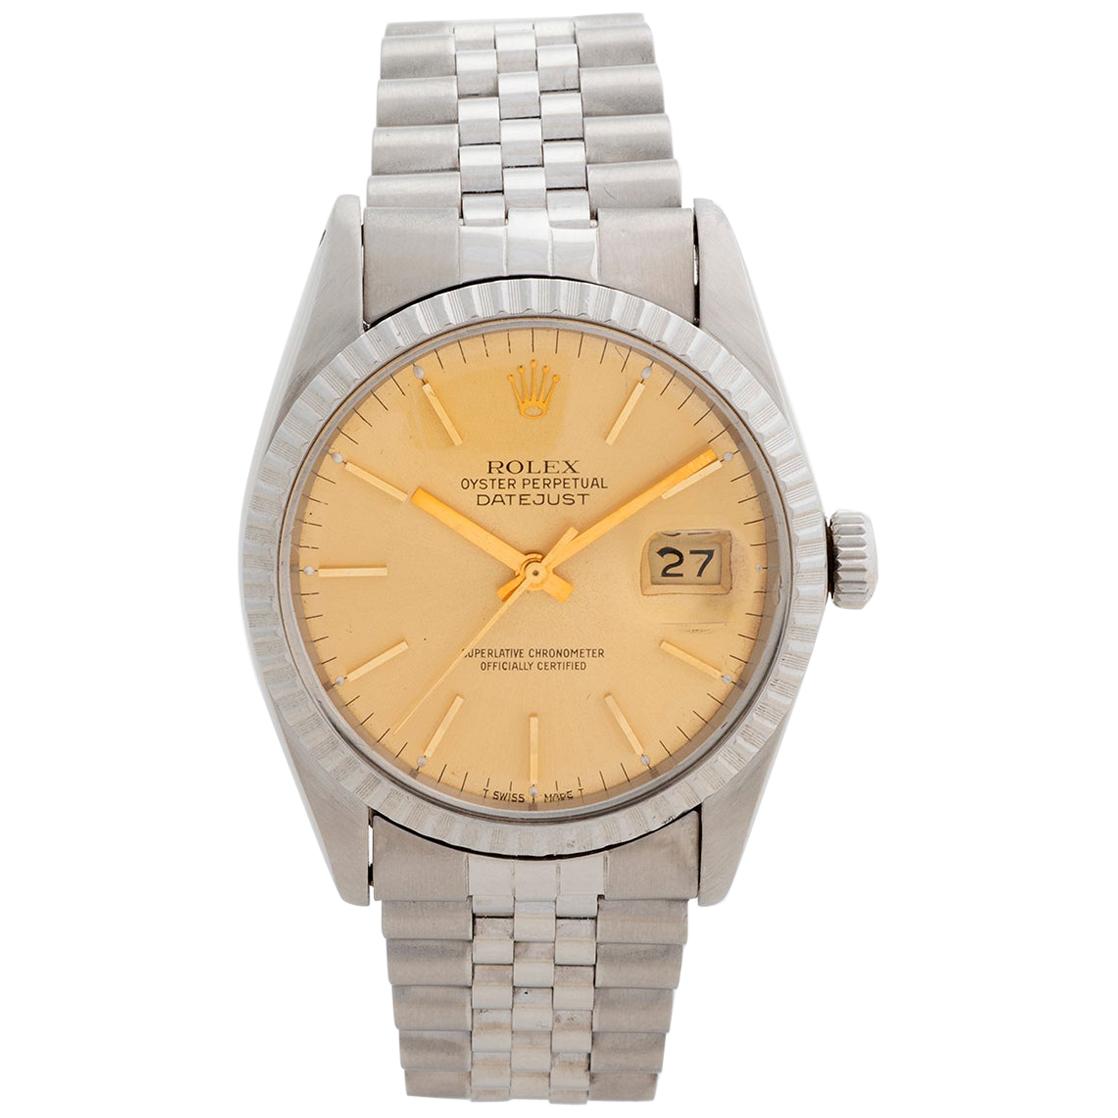 Rolex Datejust Reference 16030, Champagne Dial, Stainless Steel, Box and Papers